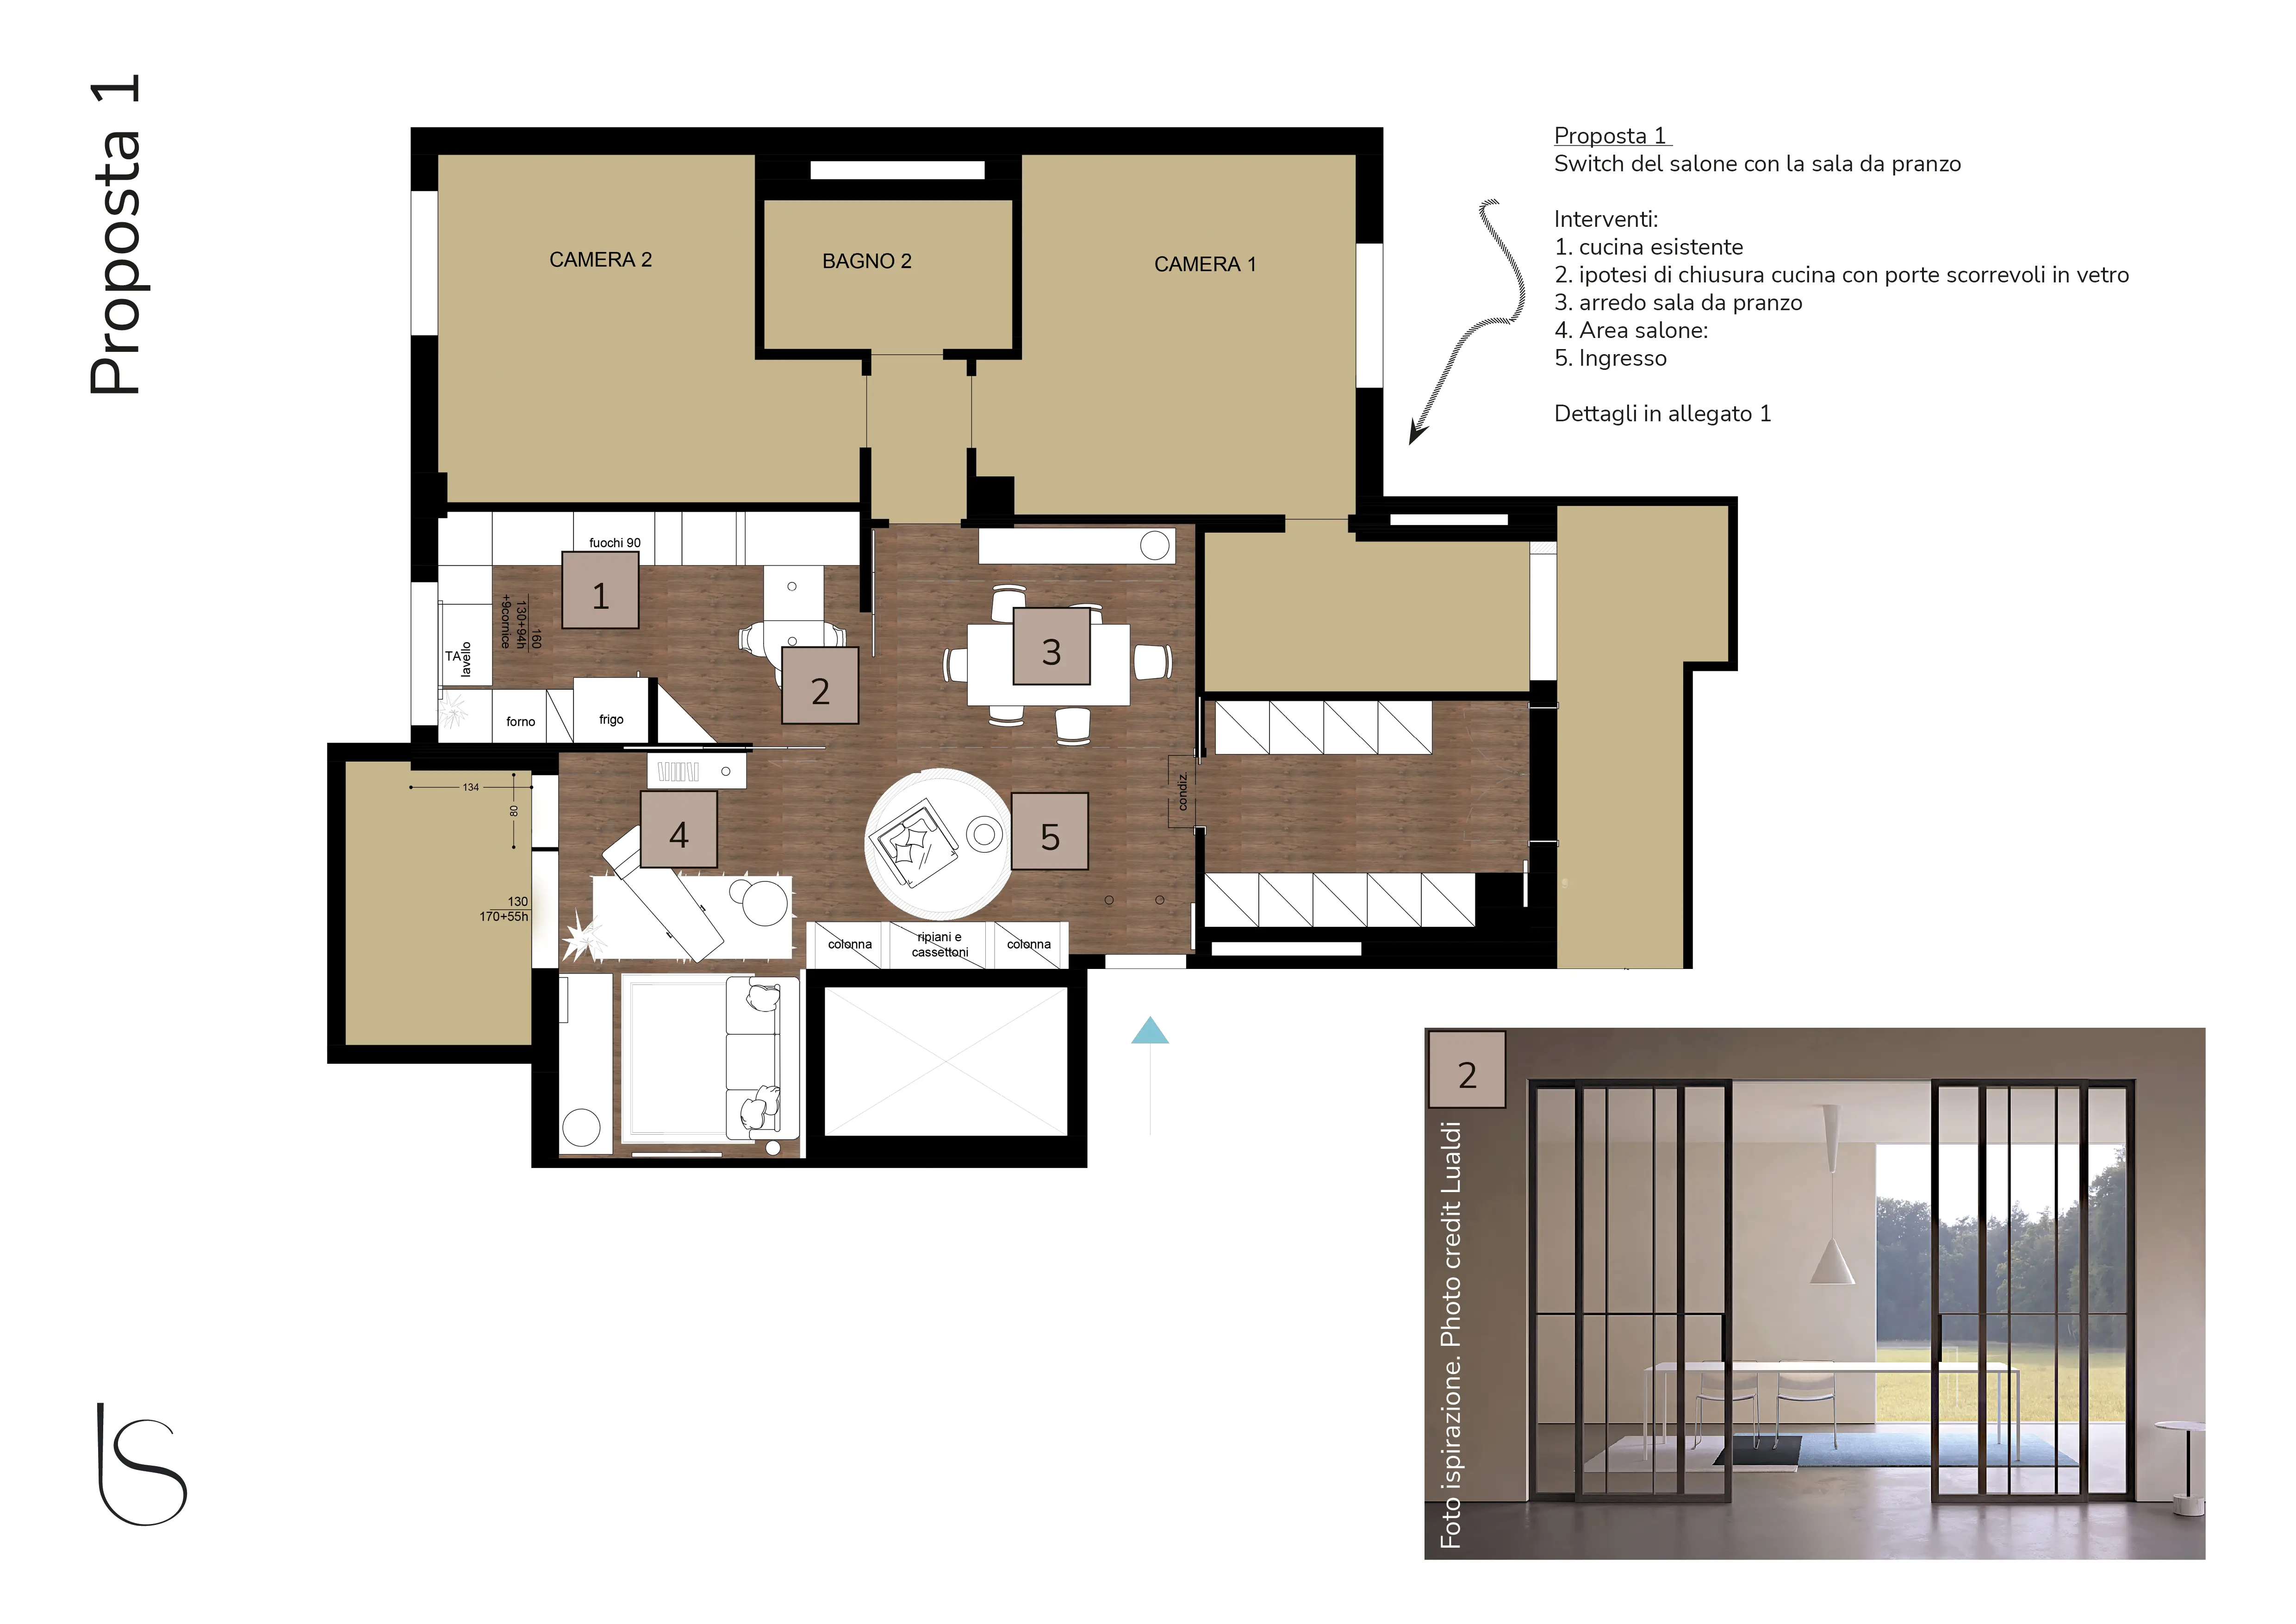 Floor plan redistribution of spaces proposal 1, by Elles Interior Design studio, which led the interior design consultancy for a flat under renovation.